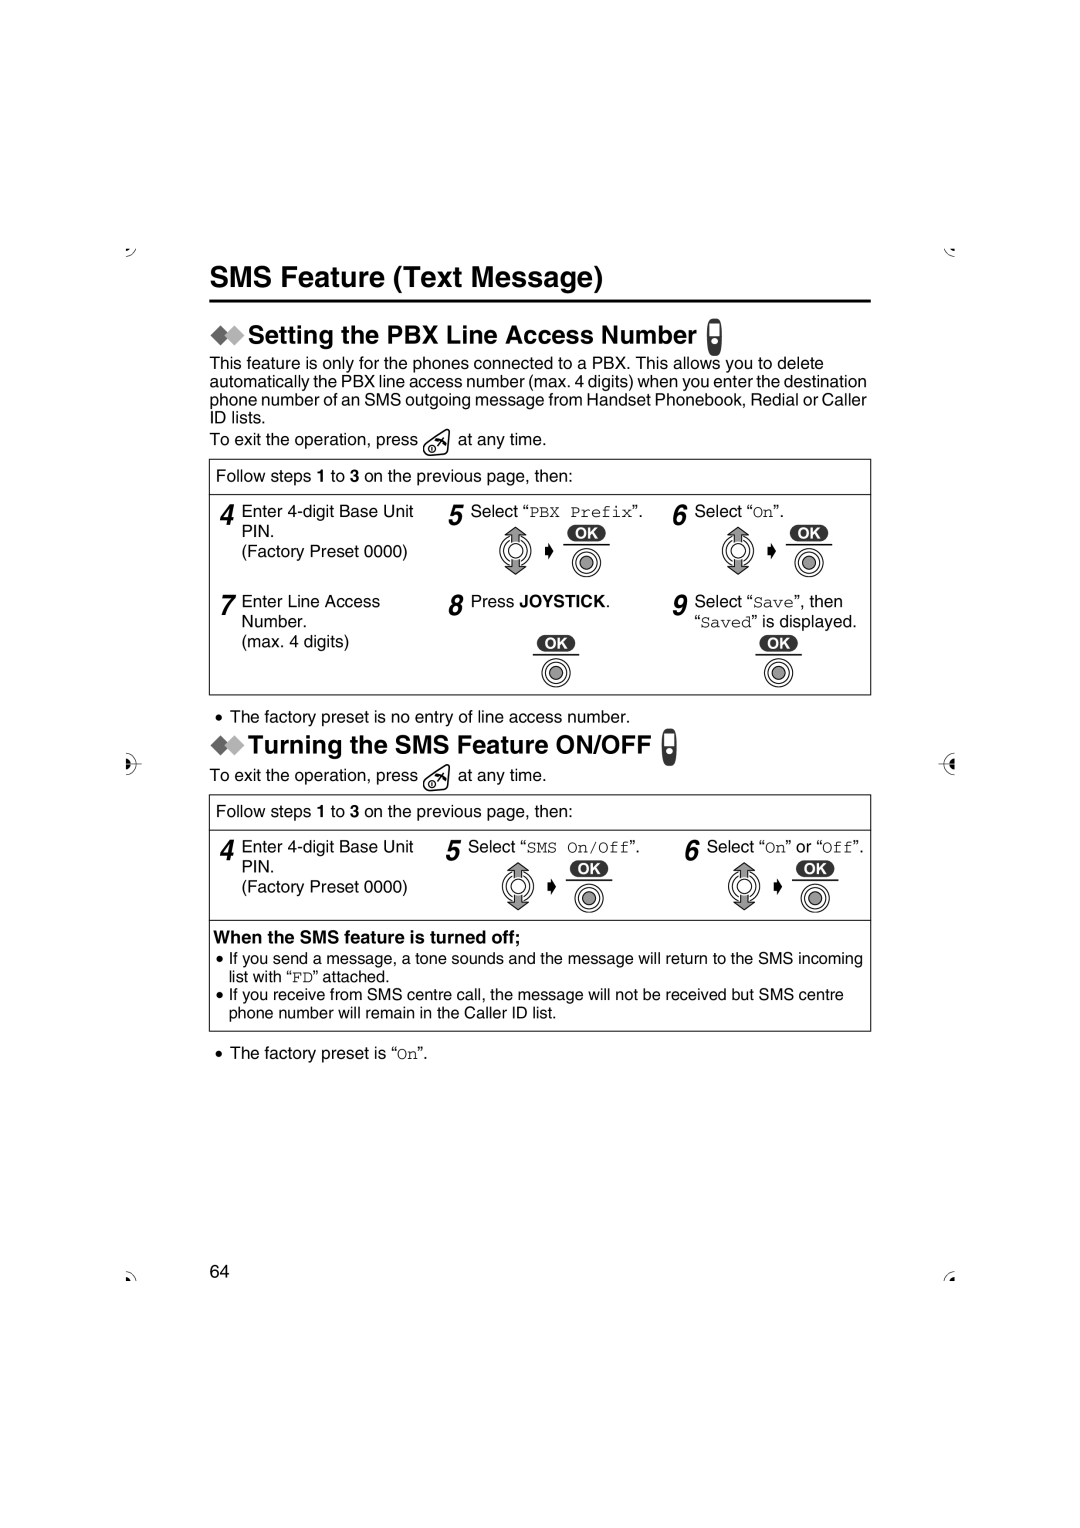 Panasonic KX-TCD535HK operating instructions Setting the PBX Line Access Number, Turning the SMS Feature ON/OFF 